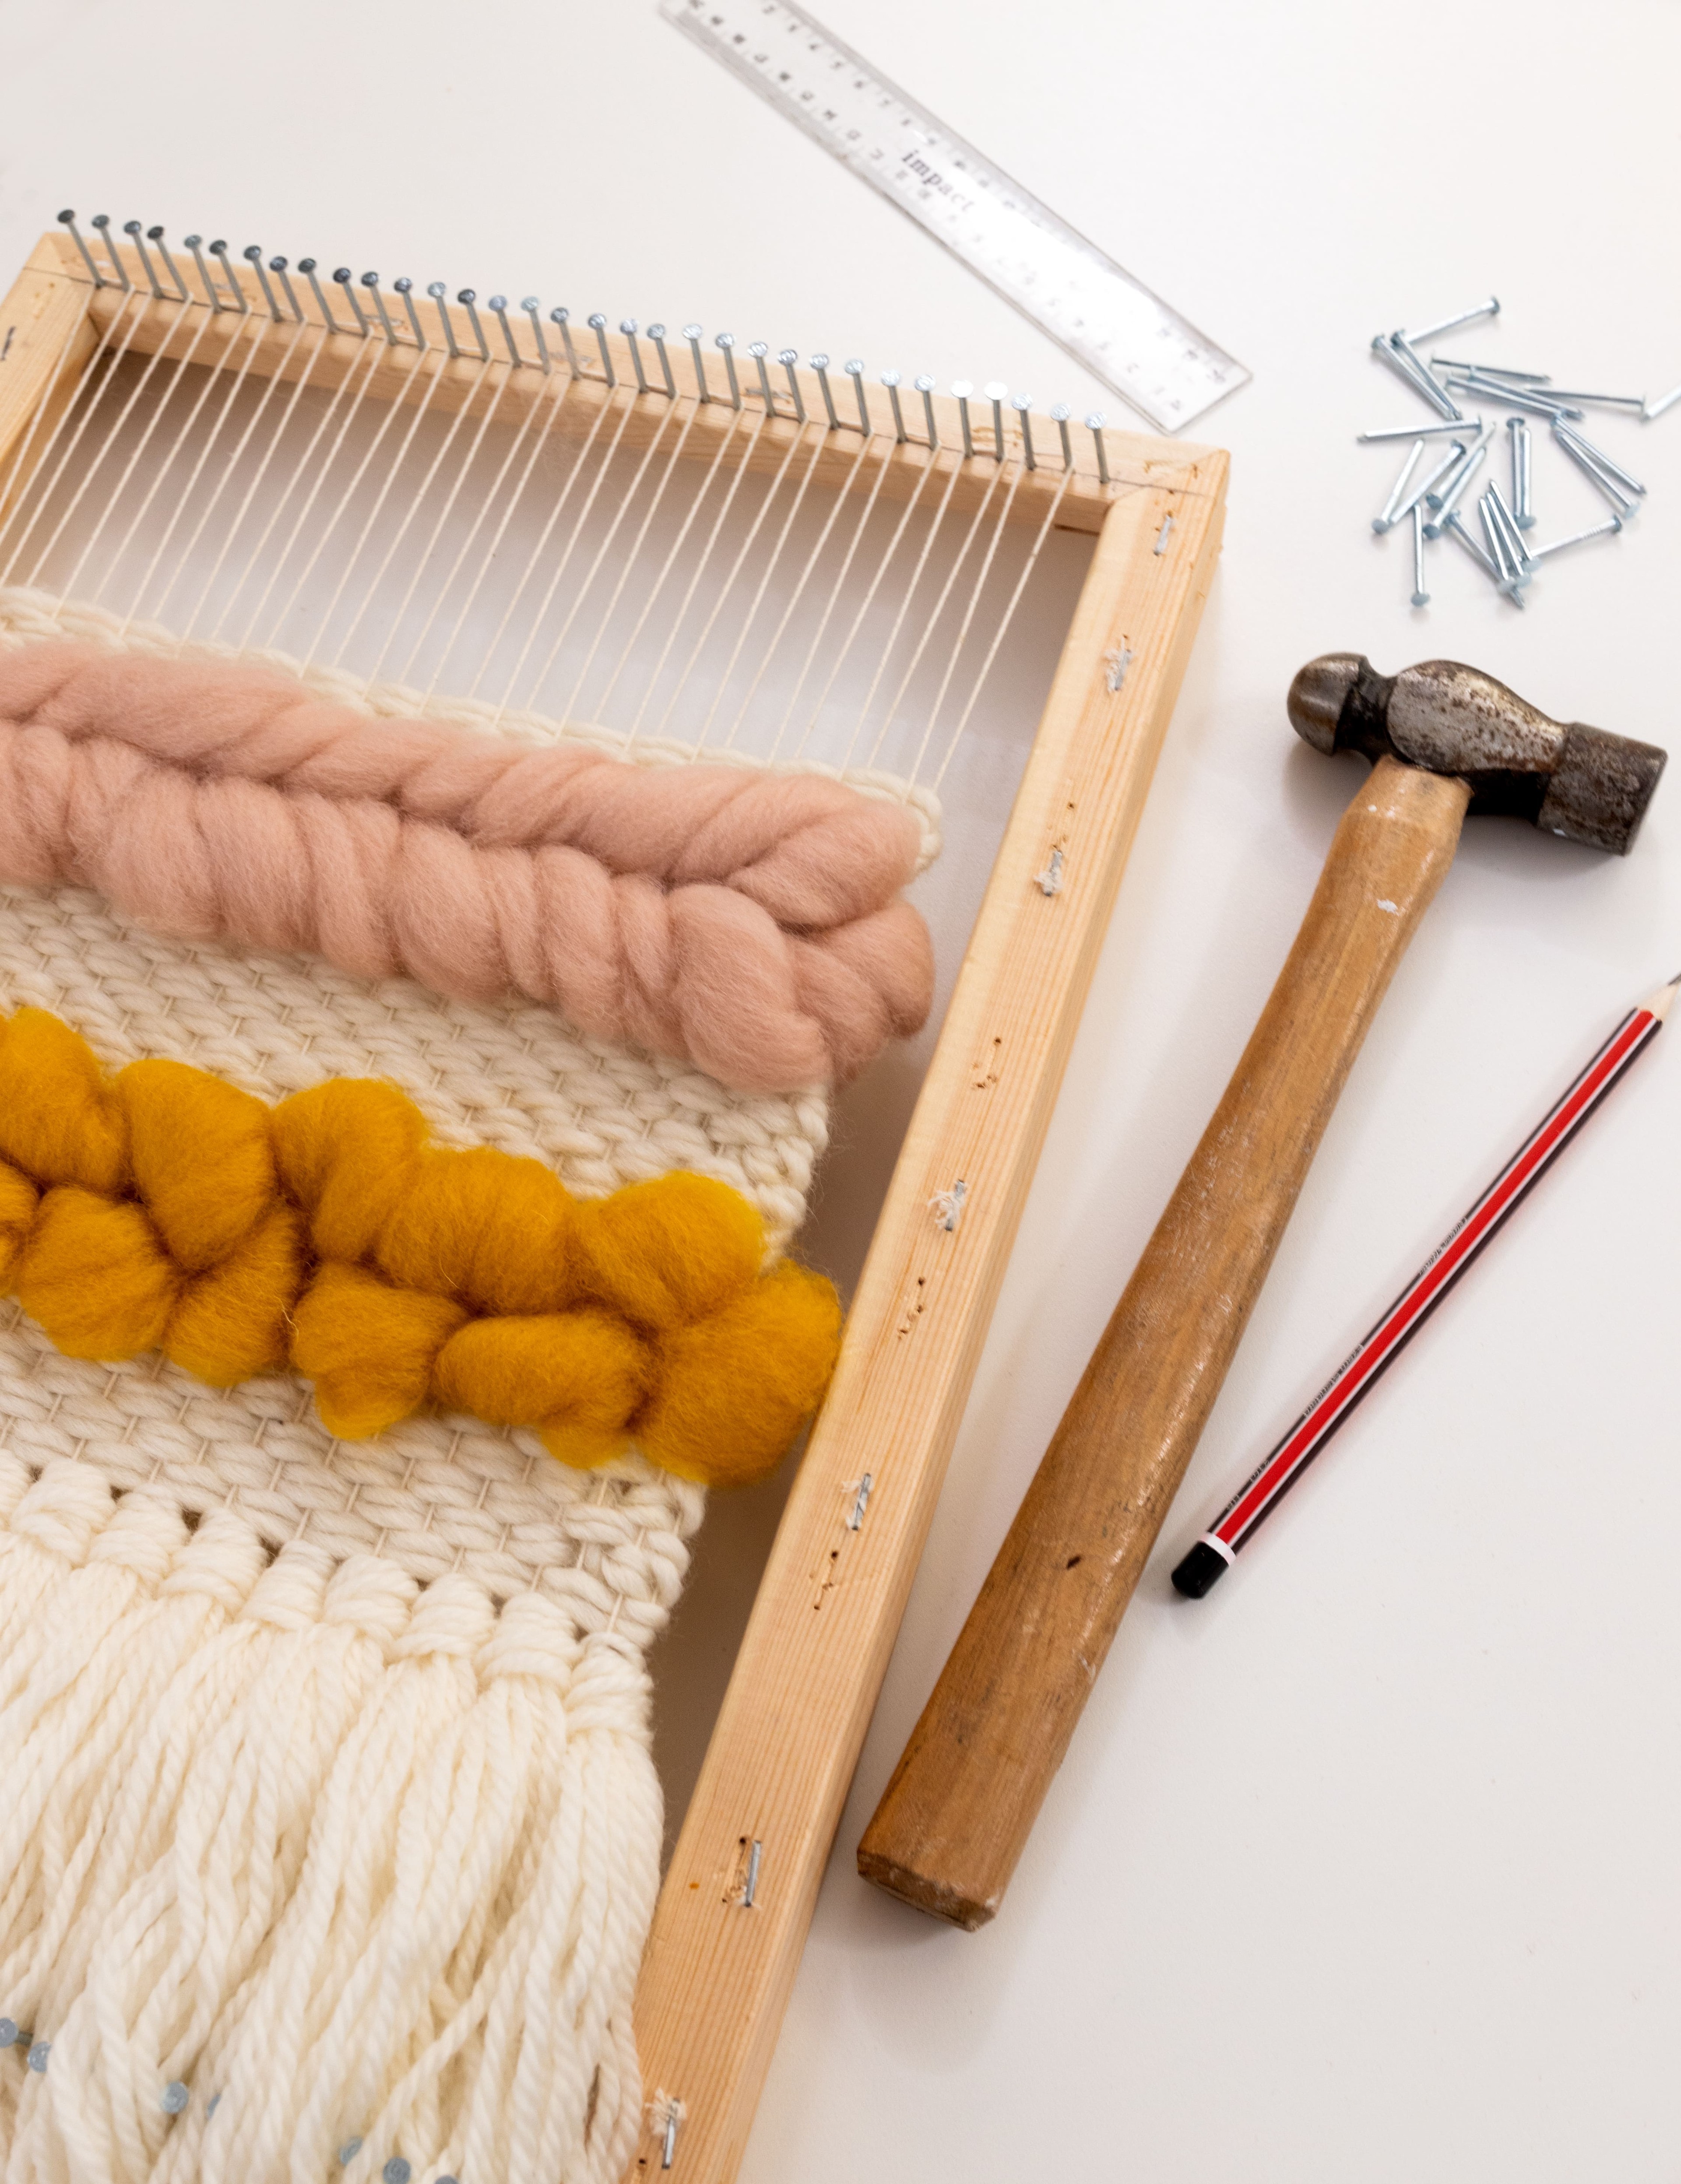 This is an image of a DIY frame loom and the supplies needed to make it.